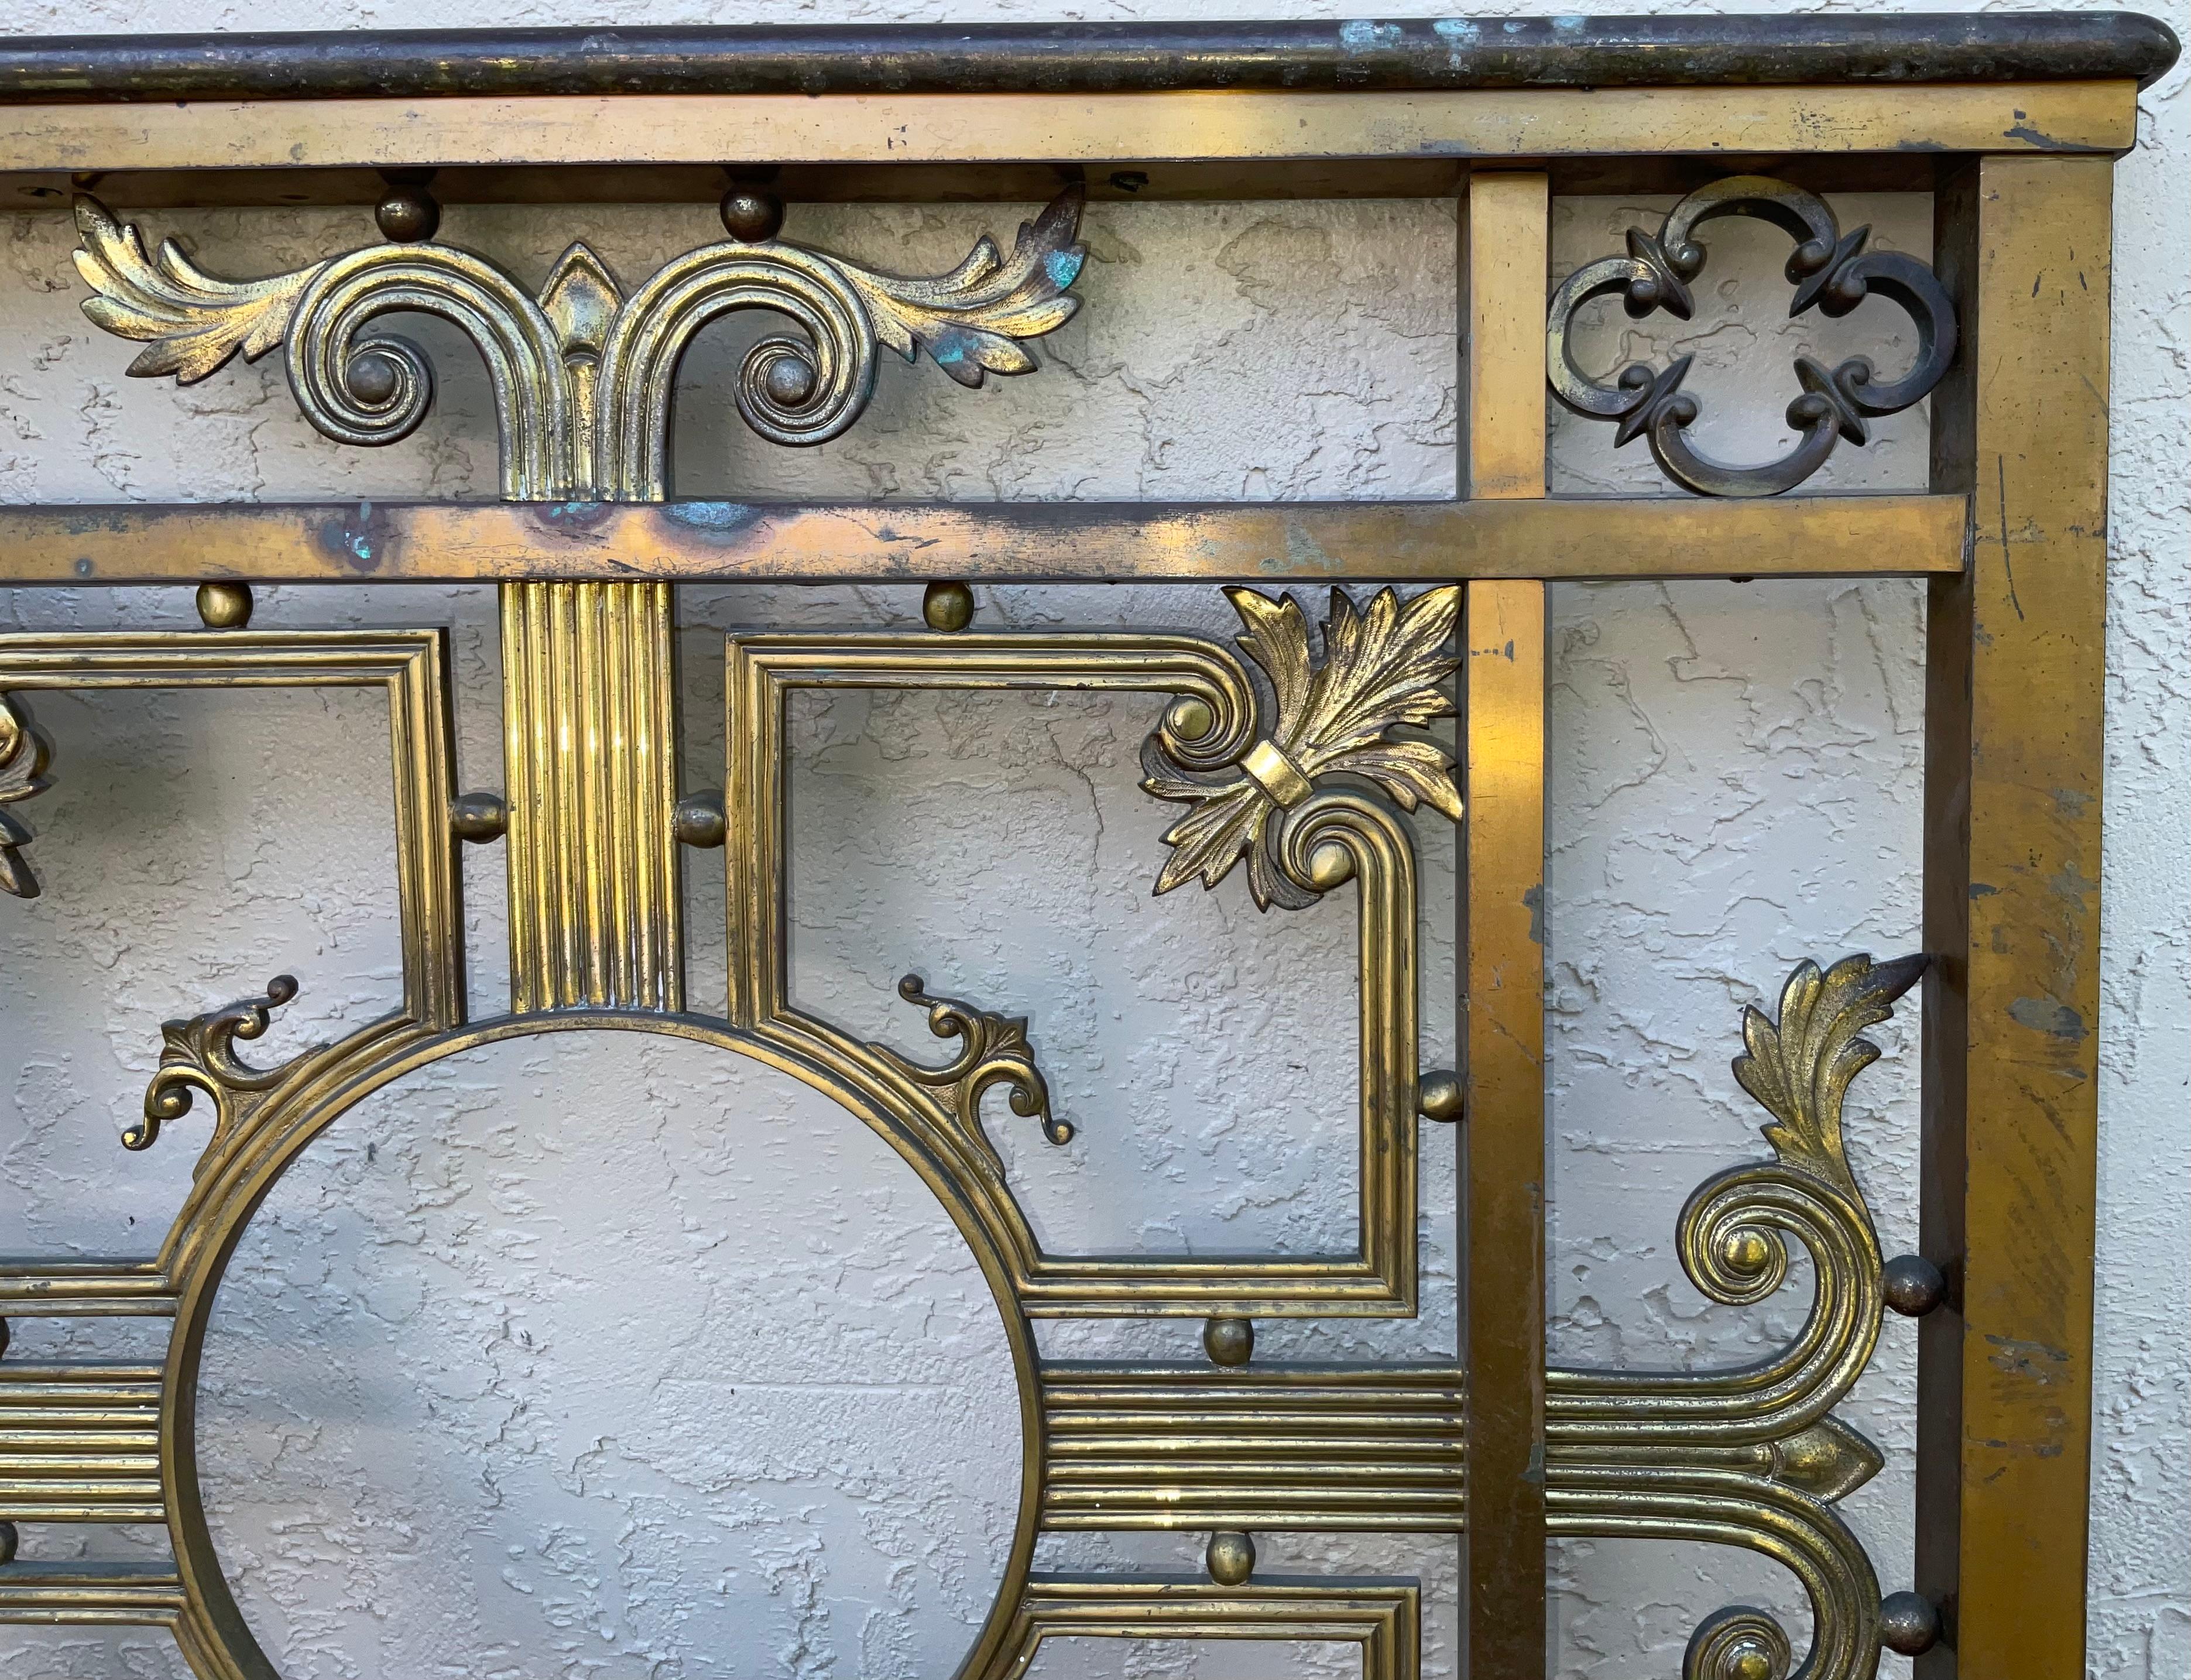 This classic early 1900's bronze pedestrian or garden gate or indoor door ,with central medallion , was salvage probably from a bank or big institution building .
exquisite and decorative motif , part of Americana salvage .
Could be converted with